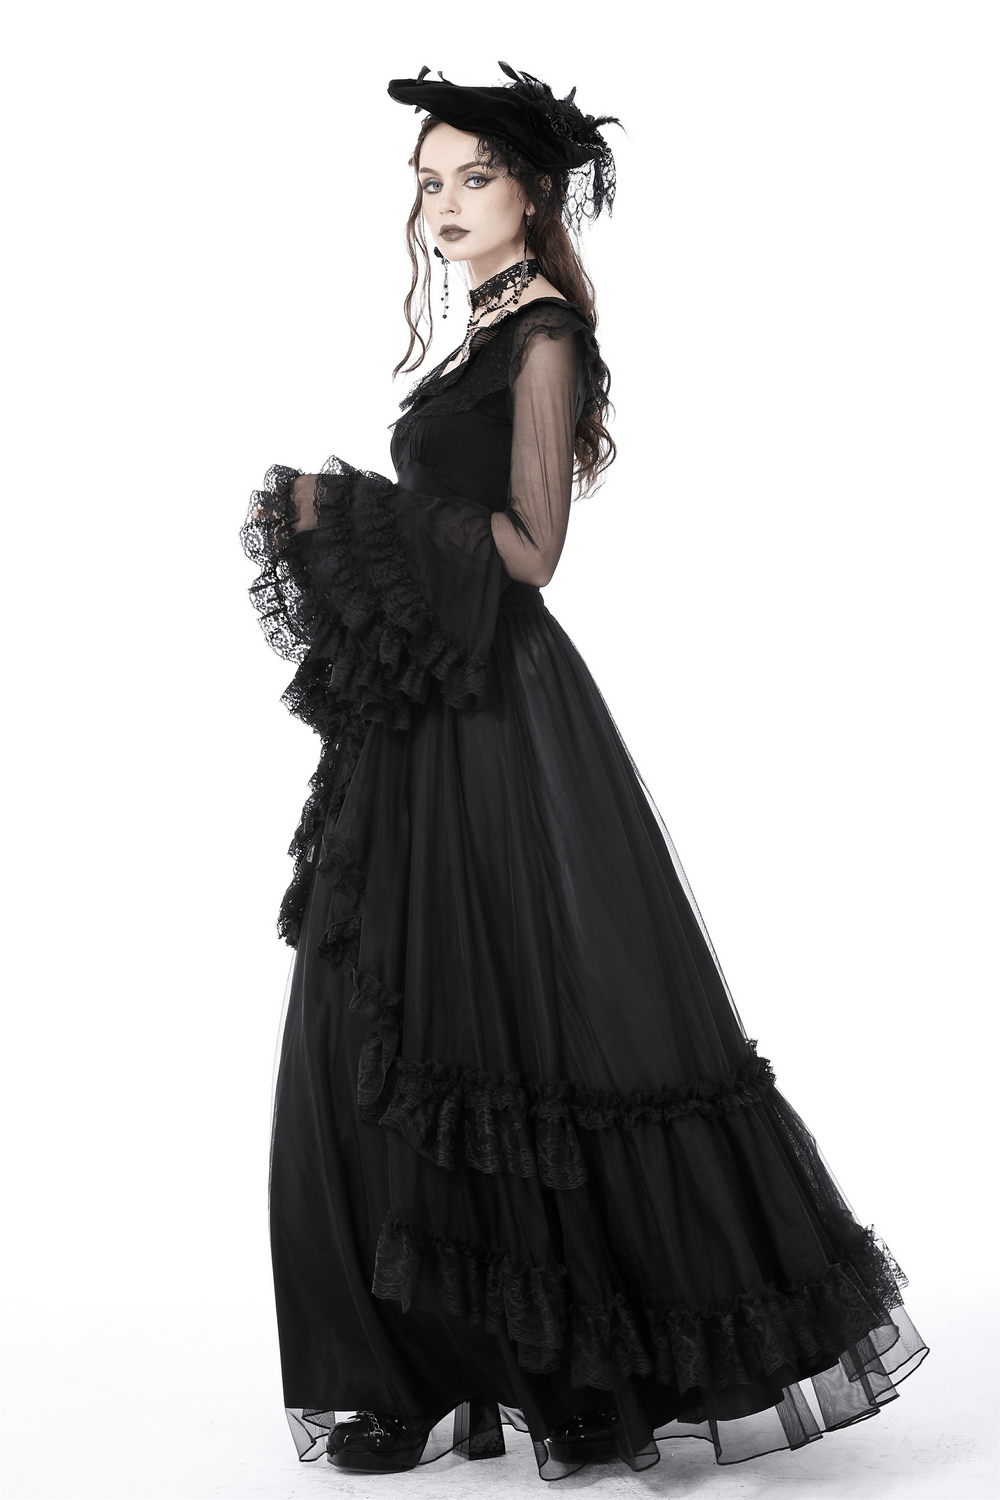 Black Gothic Chiffon High-Low Skirt with Lace Accents